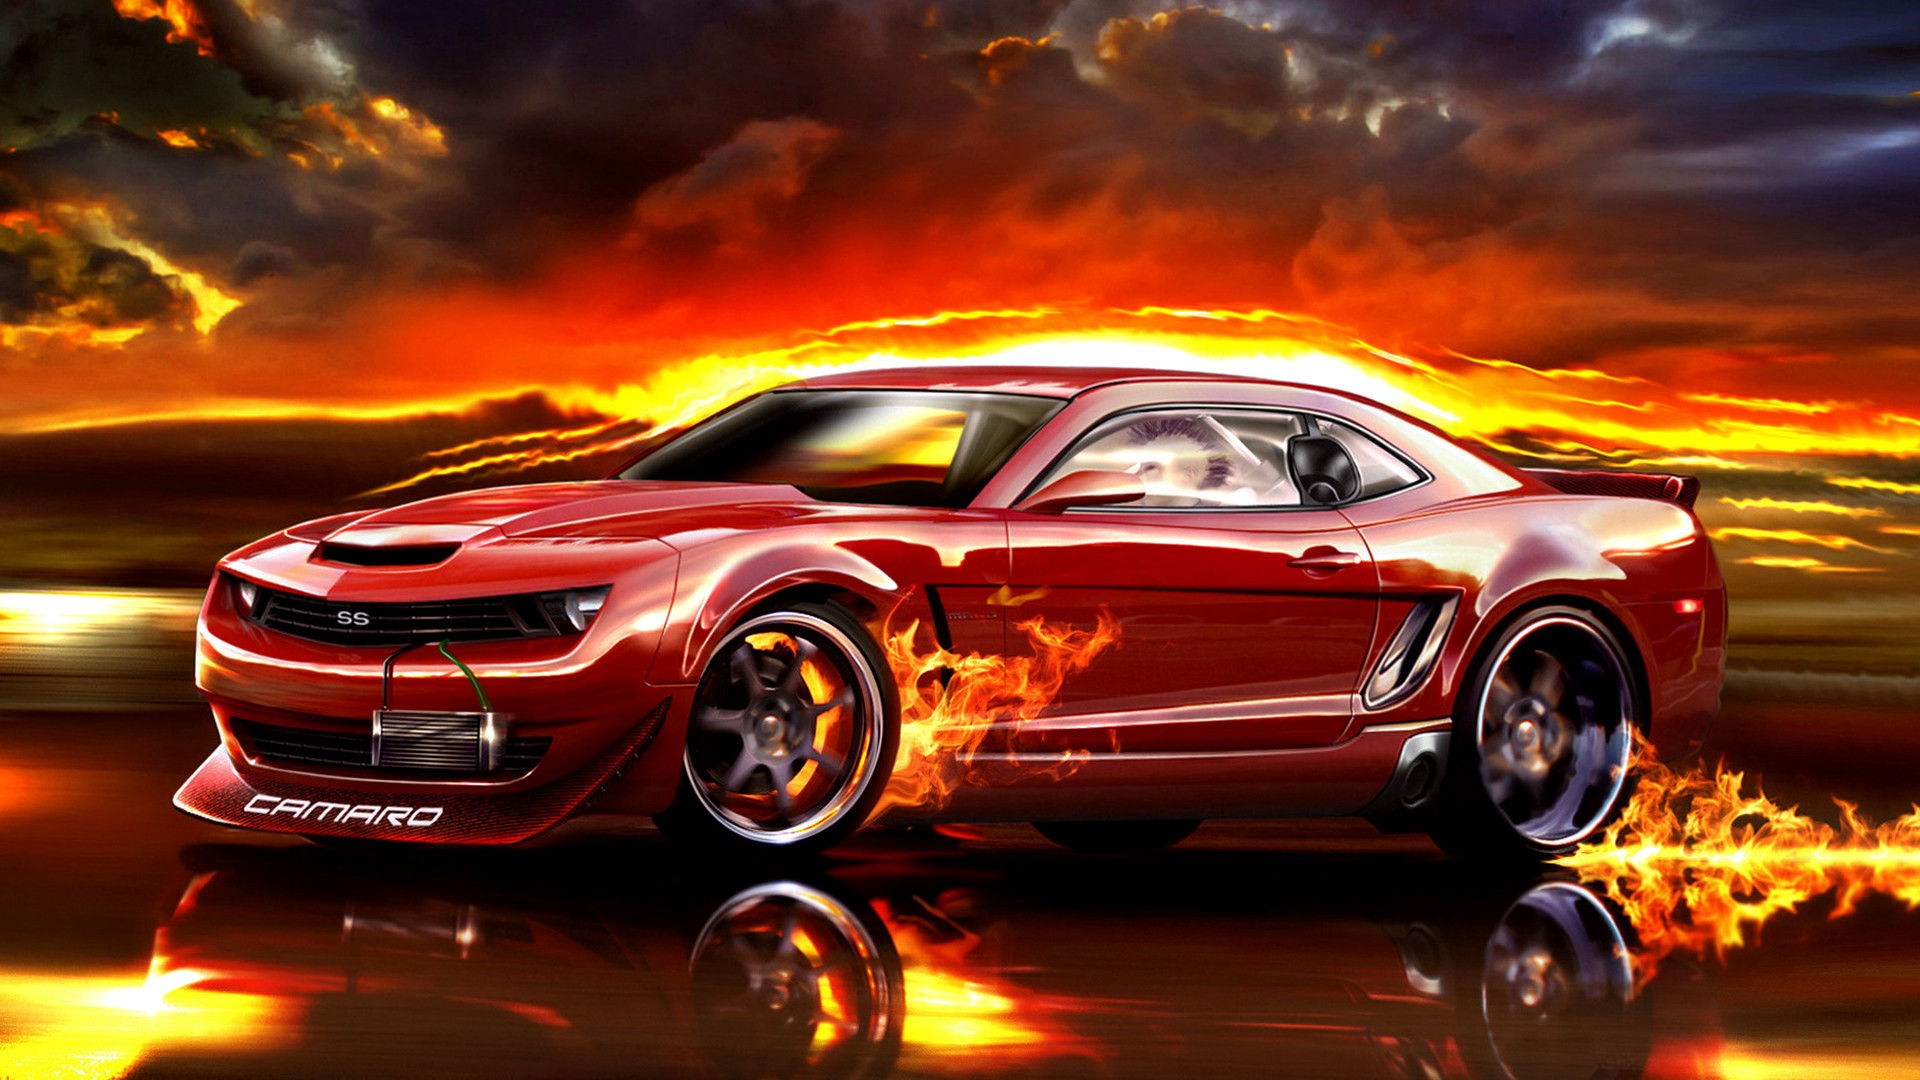 1920x1080 Red Chevrolet Camaro Fire Wallpapers HD / Desktop and Mobile Backgrounds